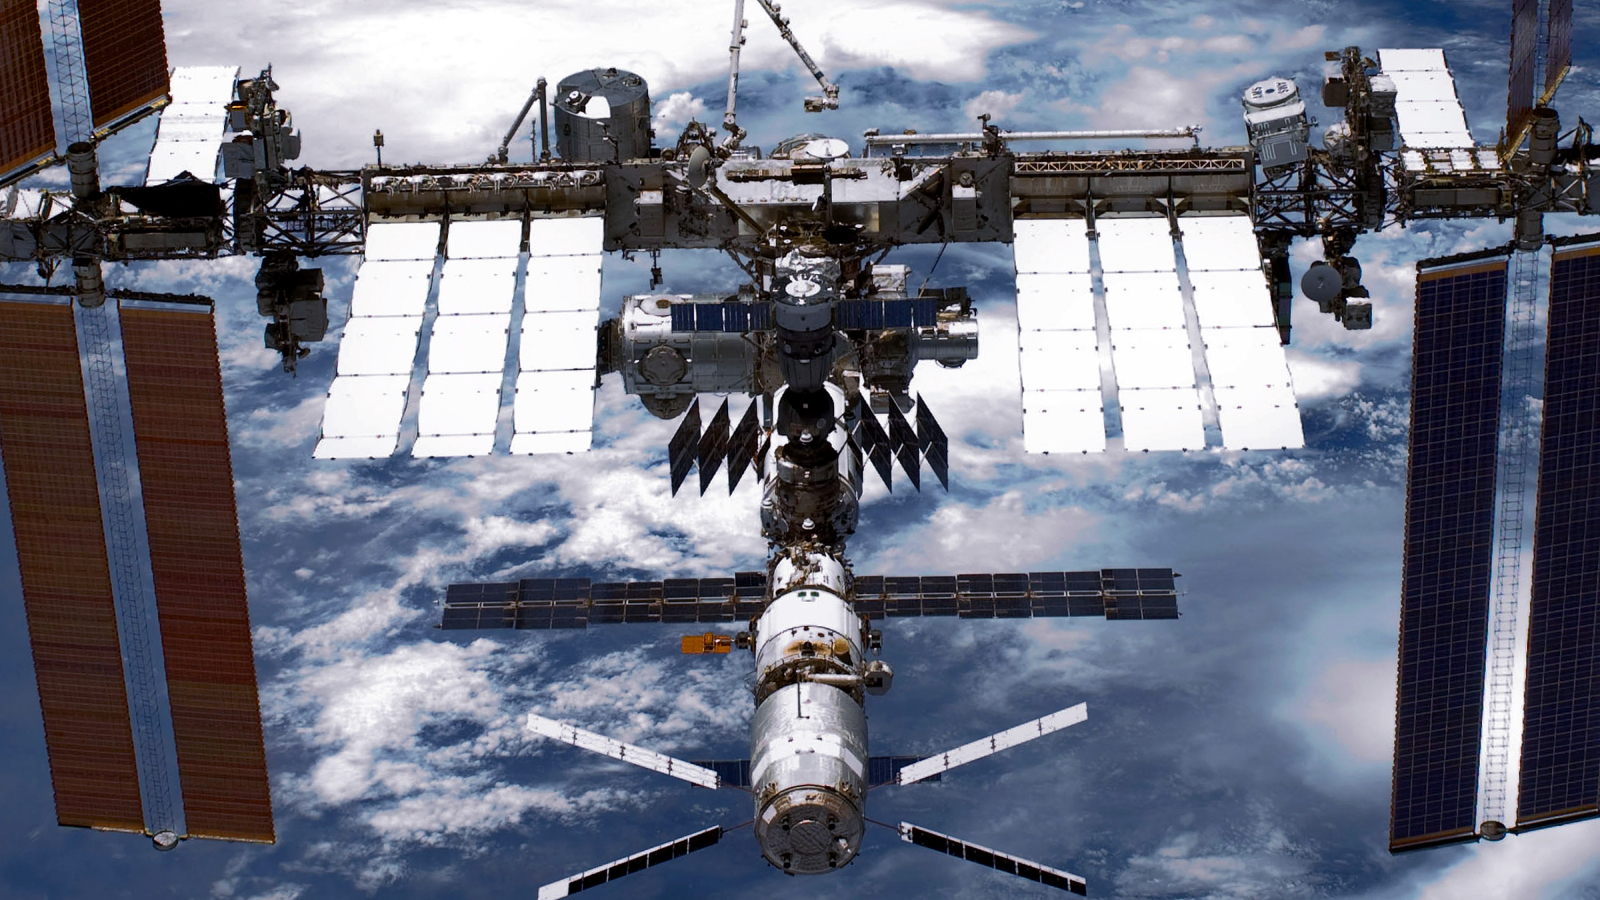  Antimatter detected on International Space Station could reveal new physics 